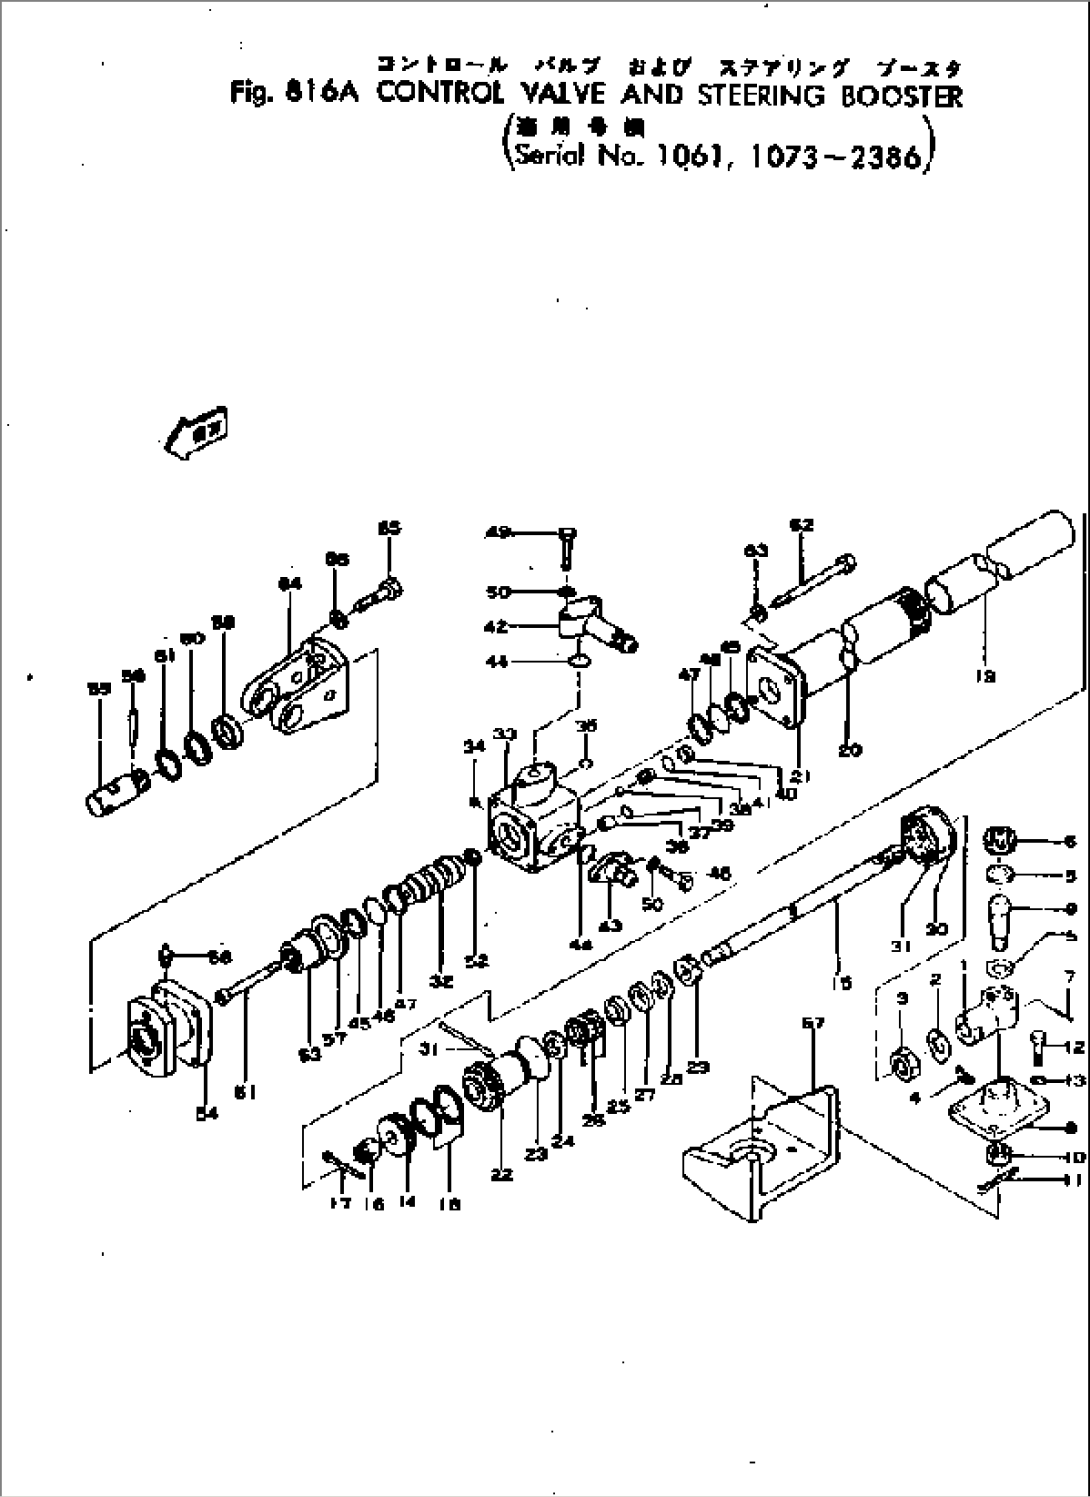 CONTROL VALVE AND STEERING BOOSTER(#2101-2386)